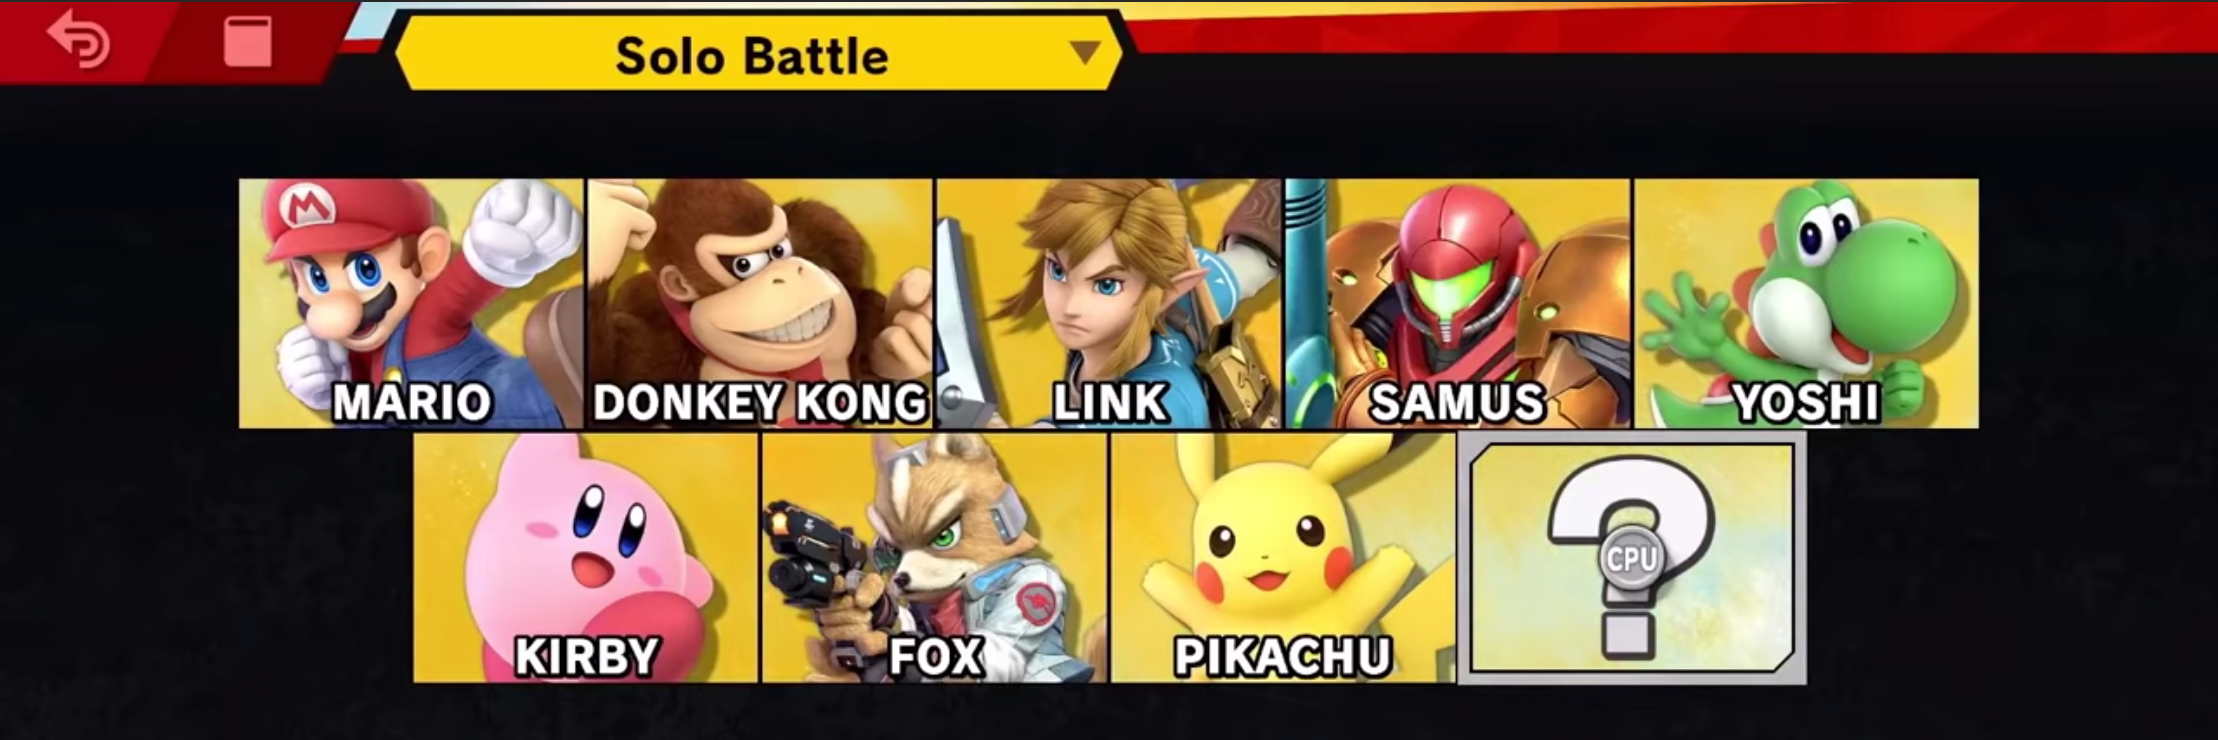 Super Smash Bros. Ultimate has a region-locked event online mode only in  Japan that resembles traditional ranked play